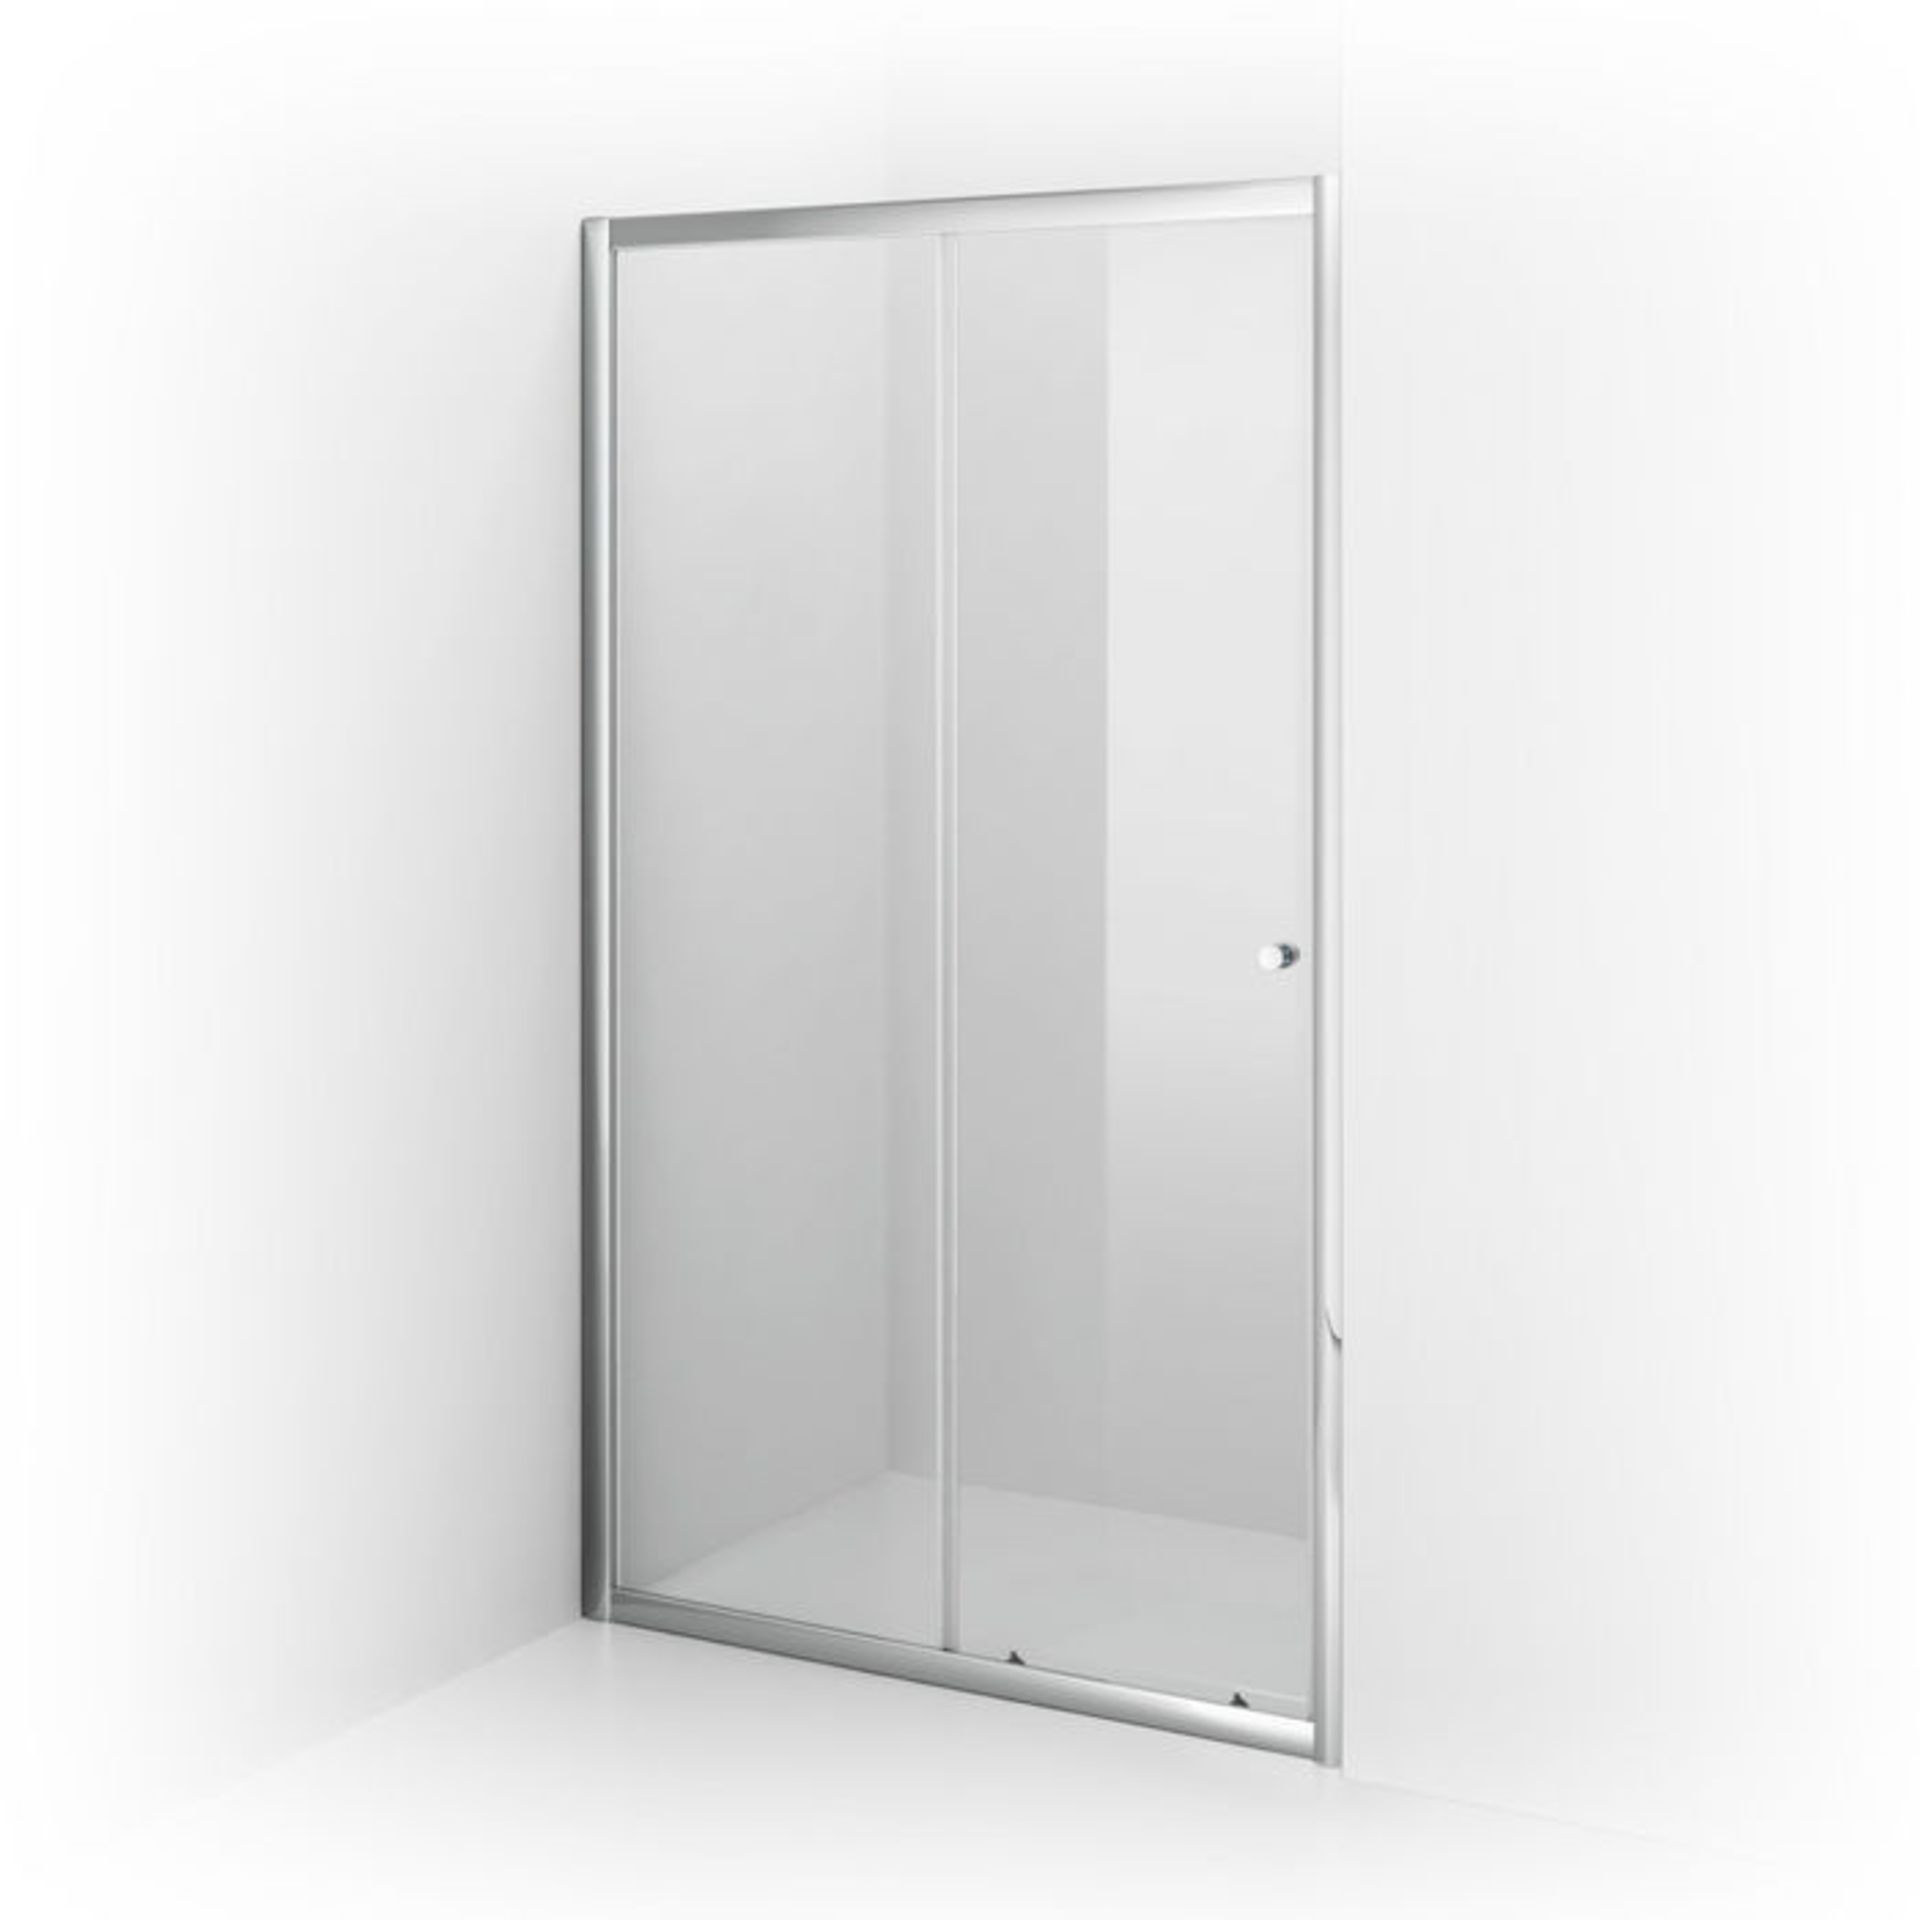 (TS268) 1200mm - Elements Sliding Shower Door. RRP £299.99. 4mm Safety Glass Fully waterproof tested - Image 4 of 4